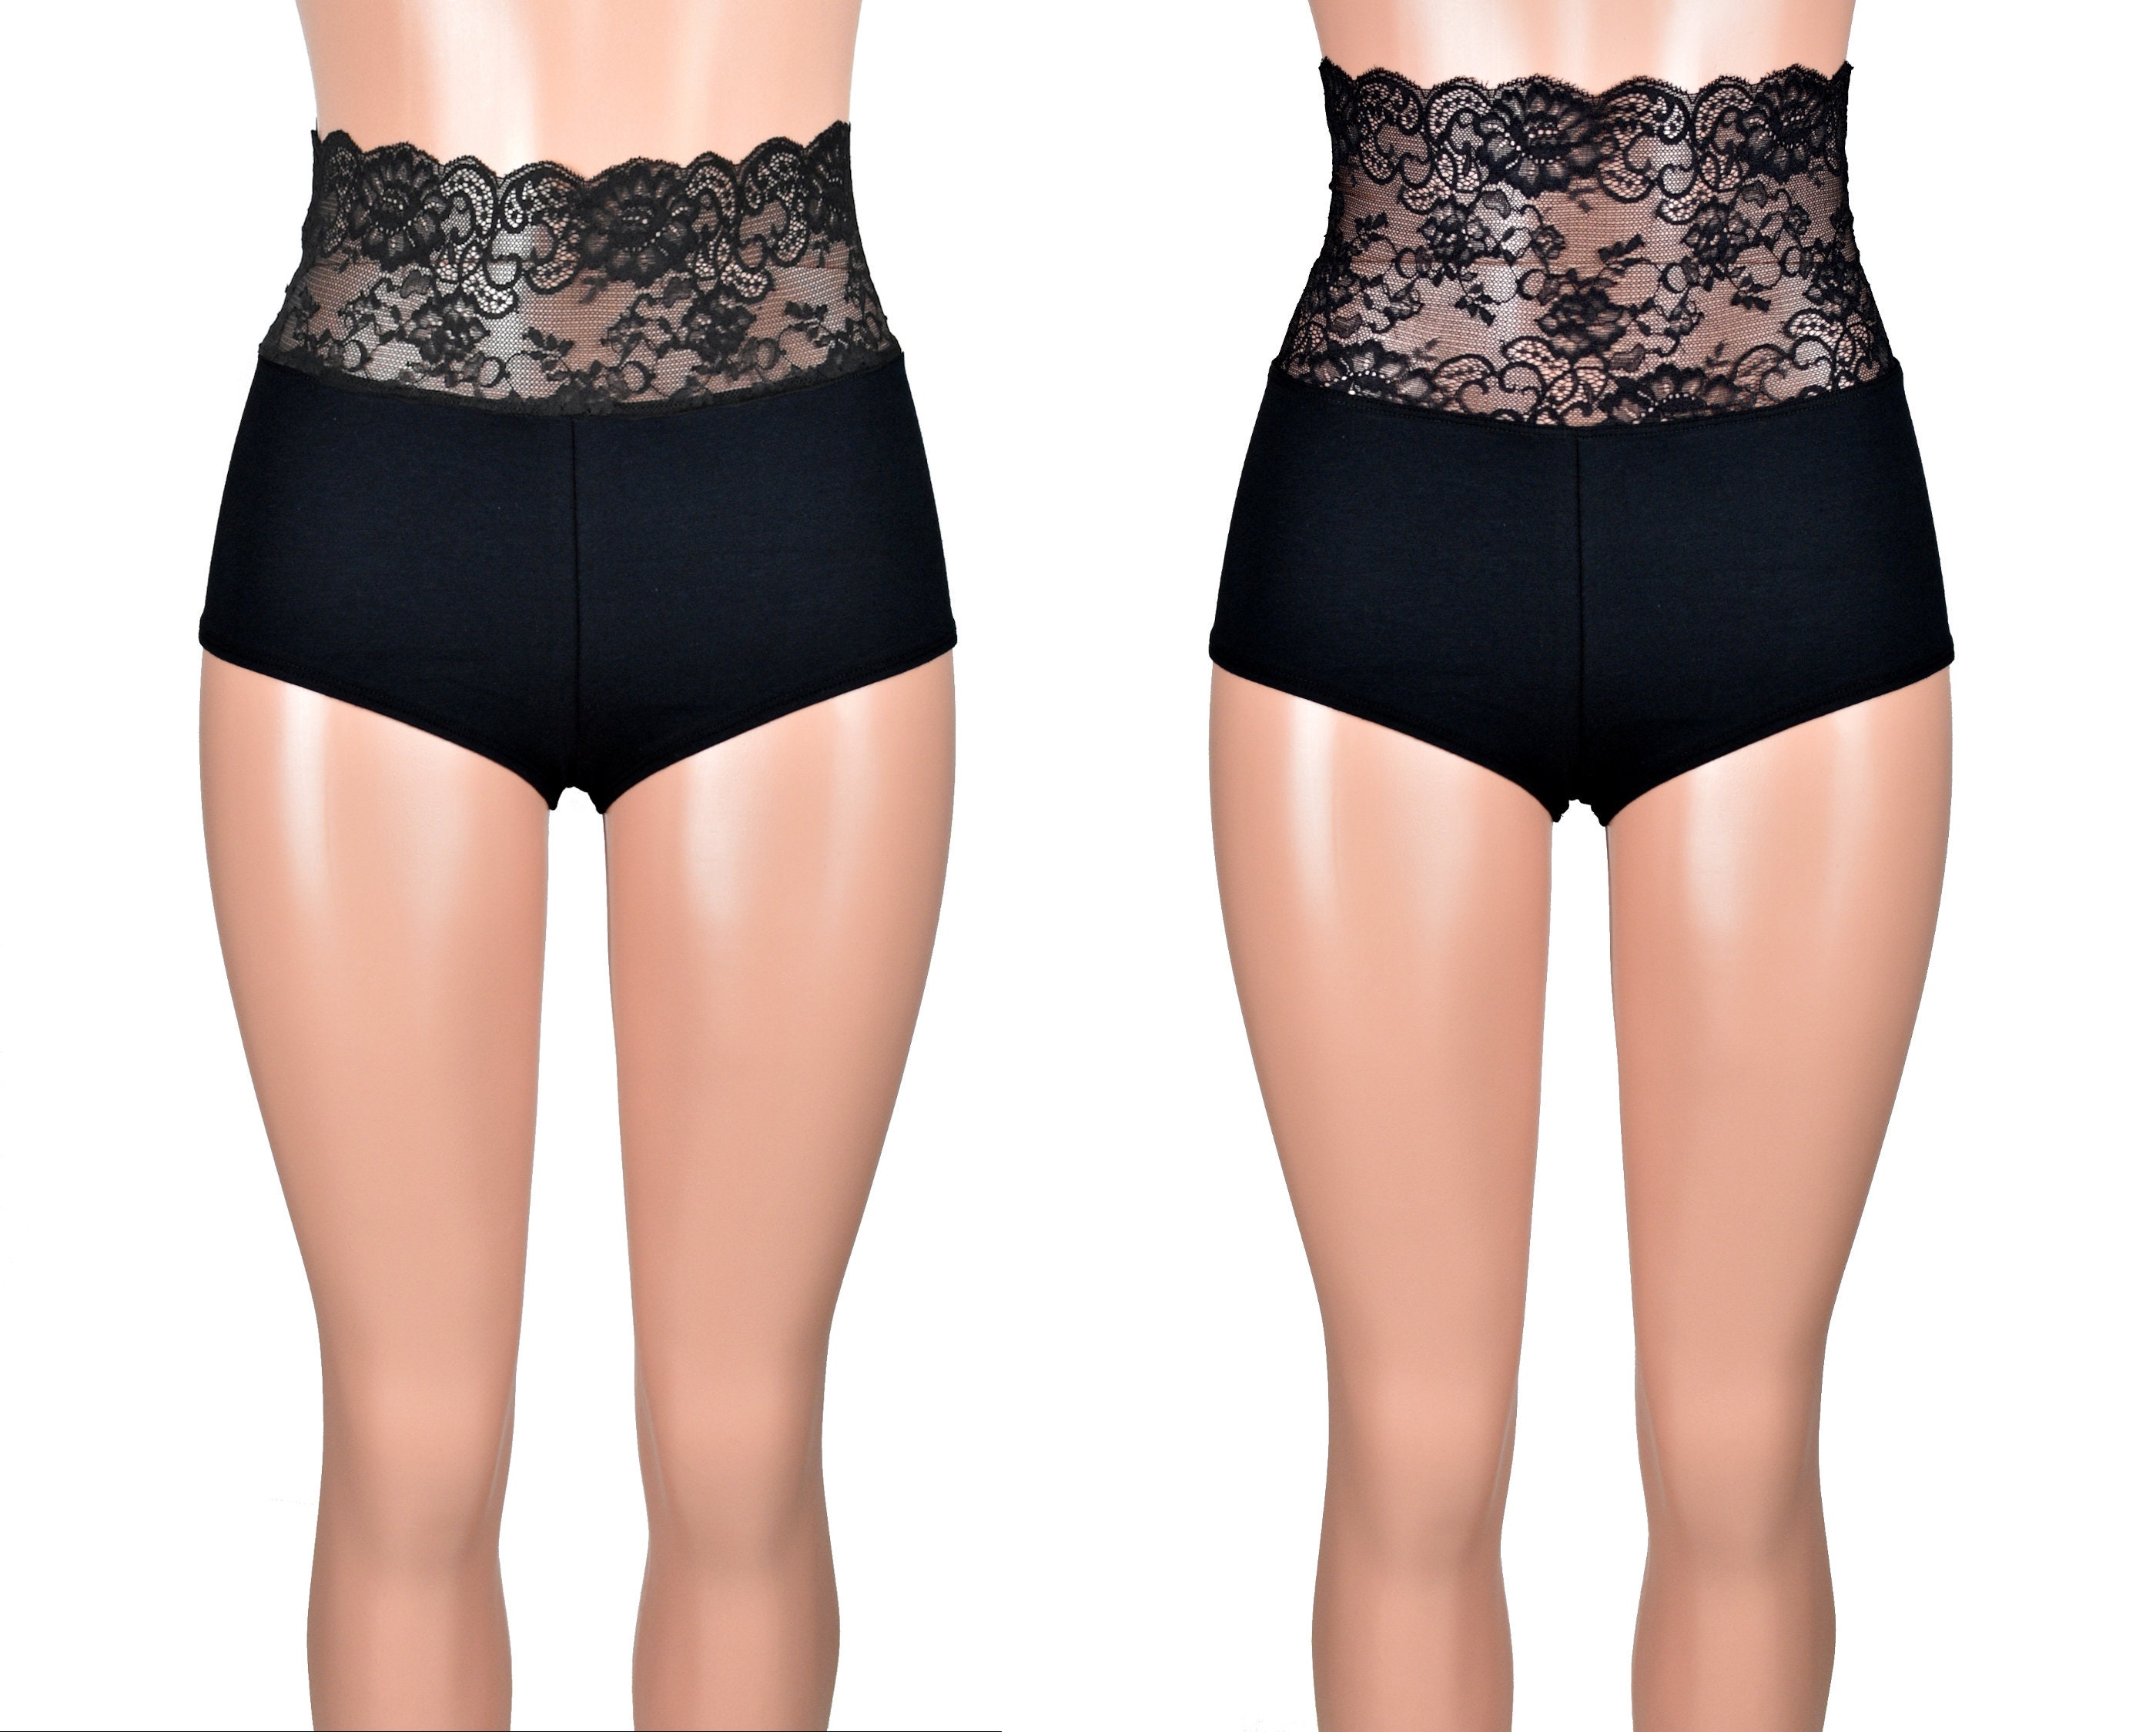 Buy High-waisted Black Cotton and Lace Booty Shorts XS S M L XL 2XL 3XL Plus  Size Stretch Hot Pants Short High Rise Underwear Undies Matte Online in  India 